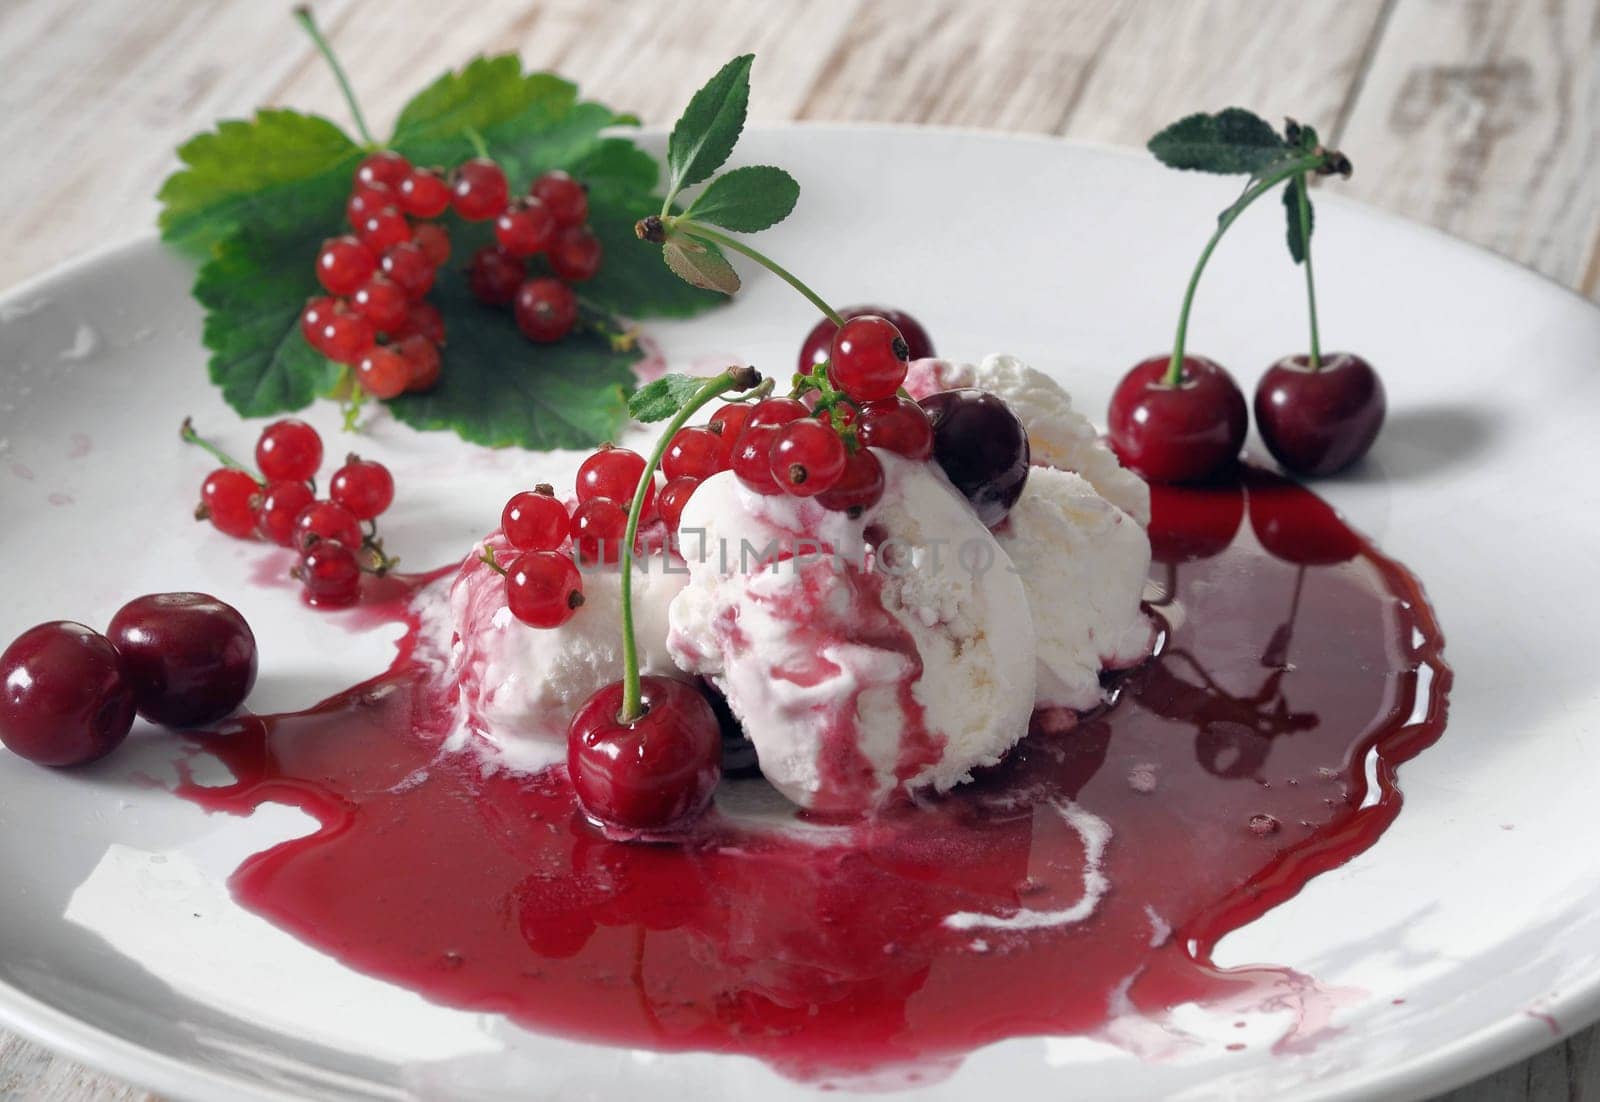 Red cherries and red currants on ice cream with jam in a white plate on a white wooden table.Food background